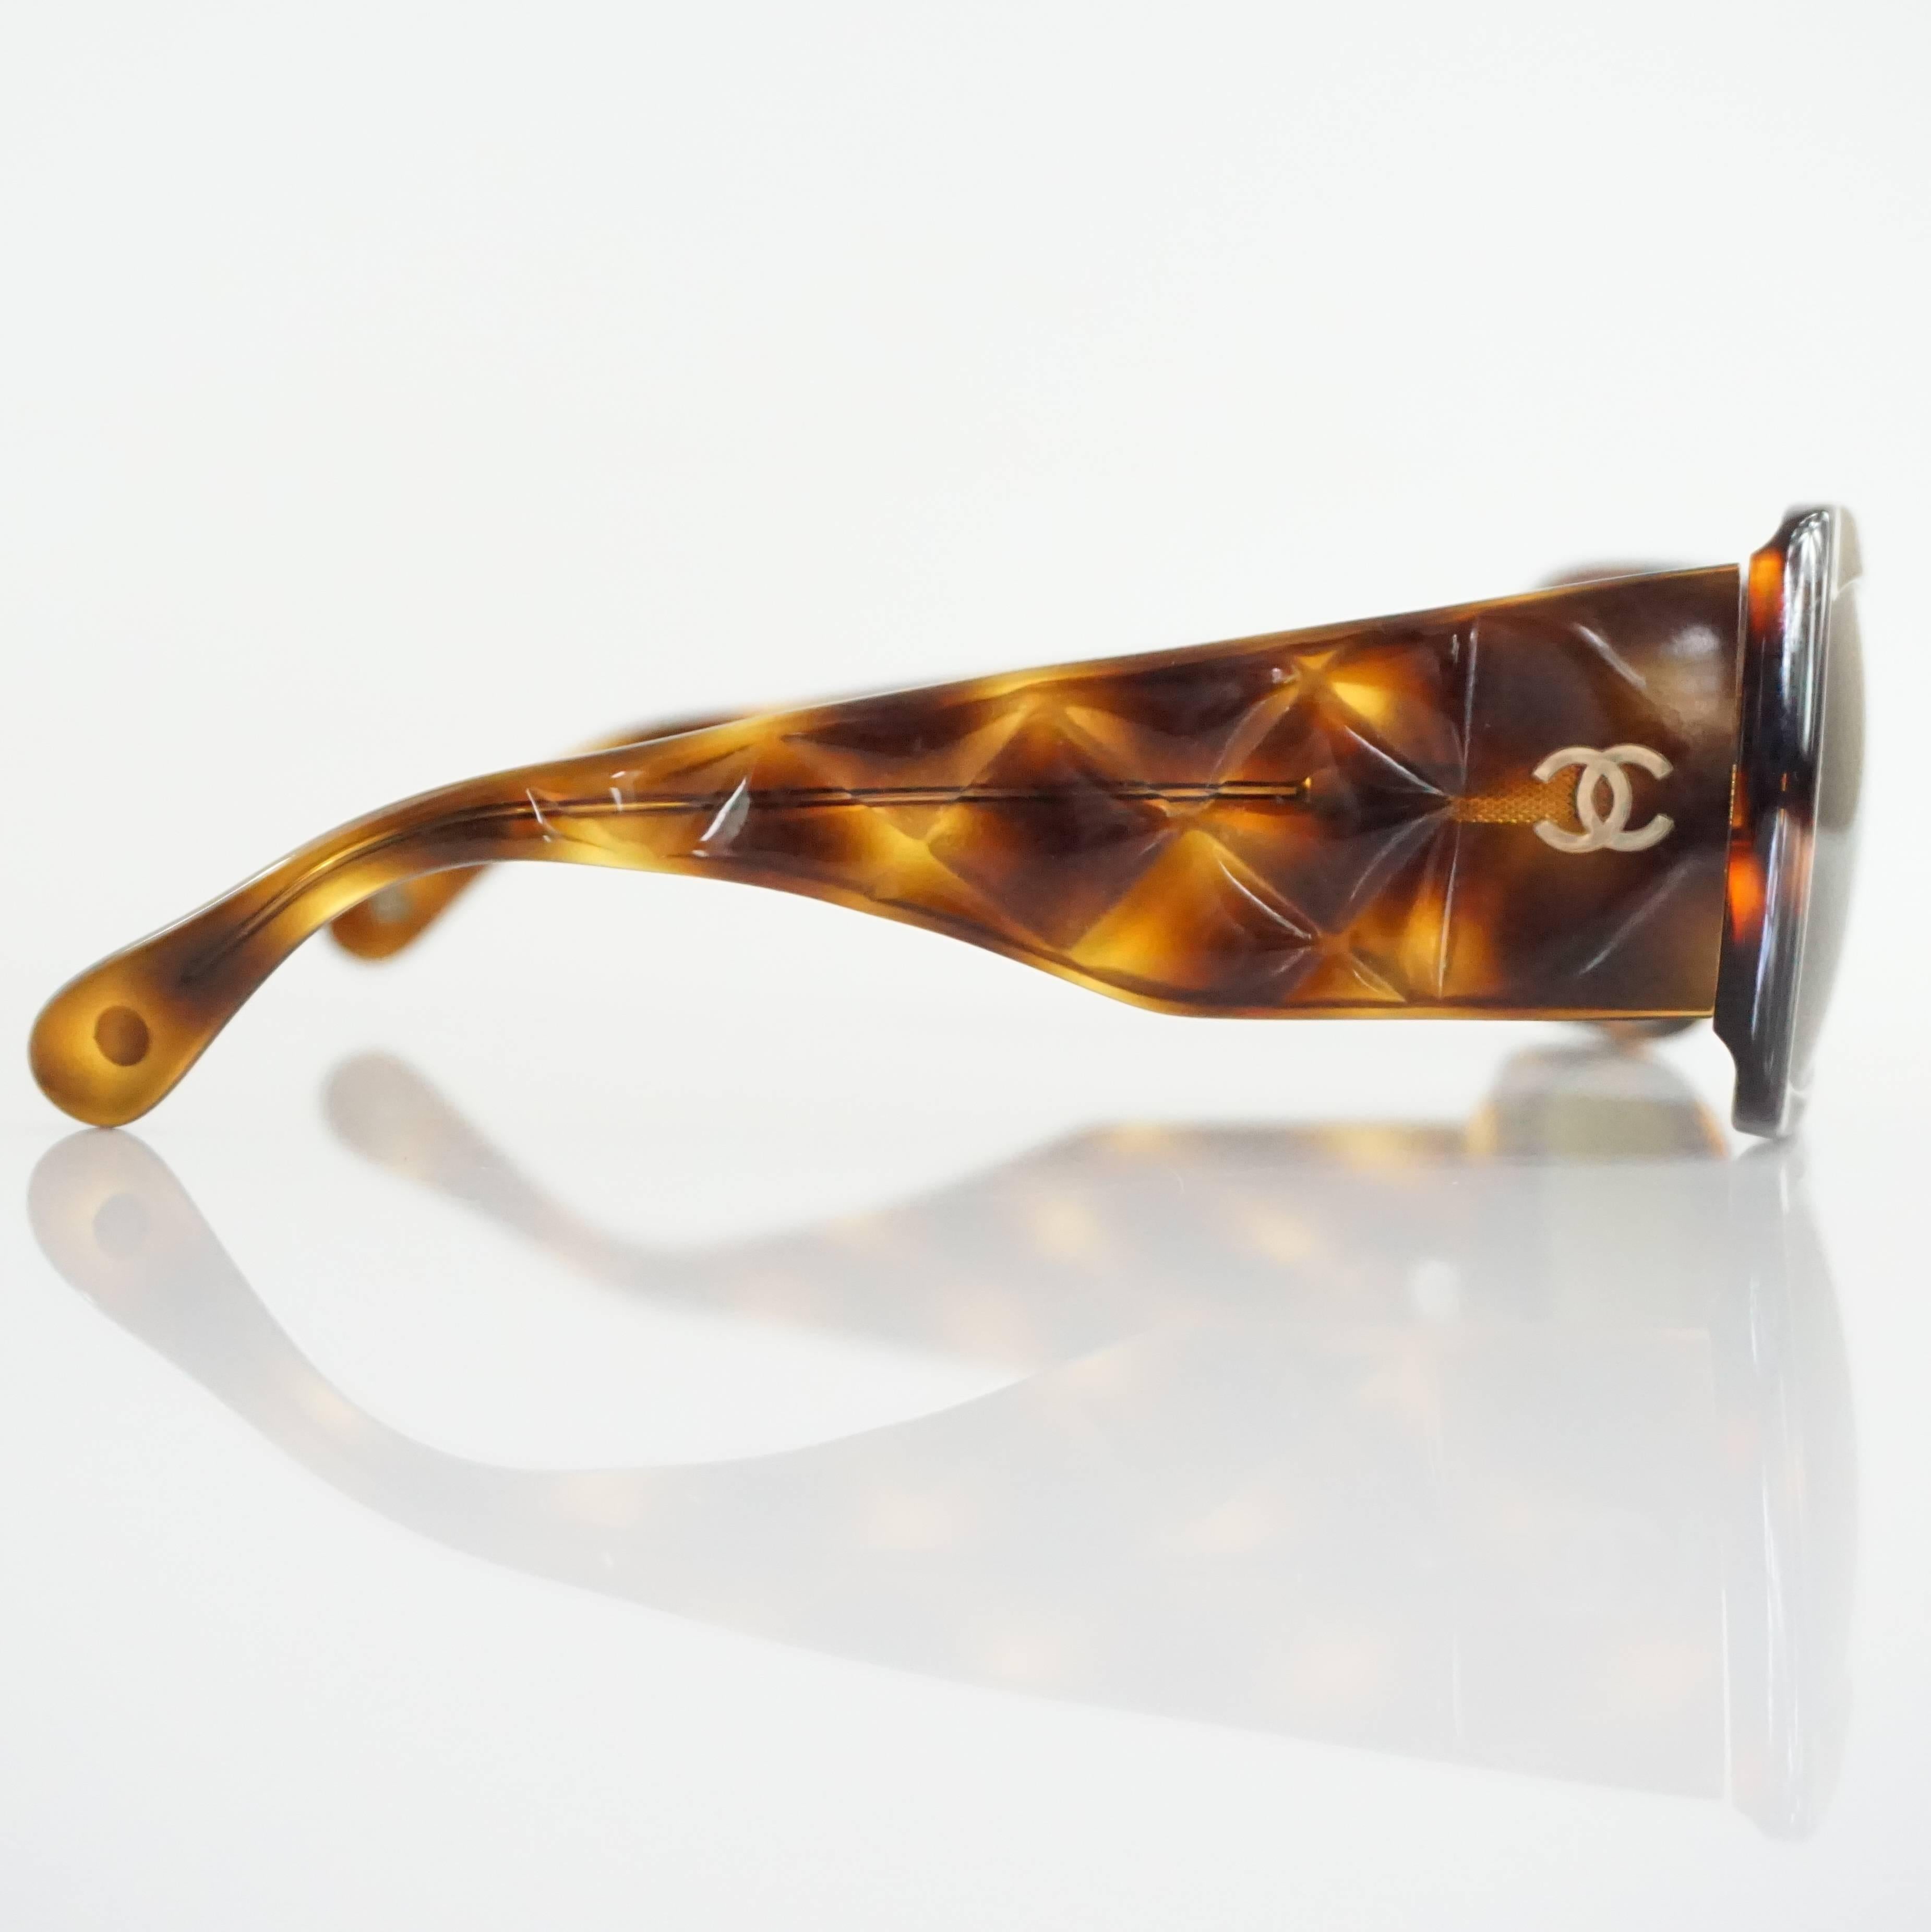 These Chanel sunglasses are tortoise shell with rectangular lenses. They have quilted sides with the Chanel logo and a white carrying case. They are in excellent condition with minor markings on the case.

Measurements
Front Length: 5.25